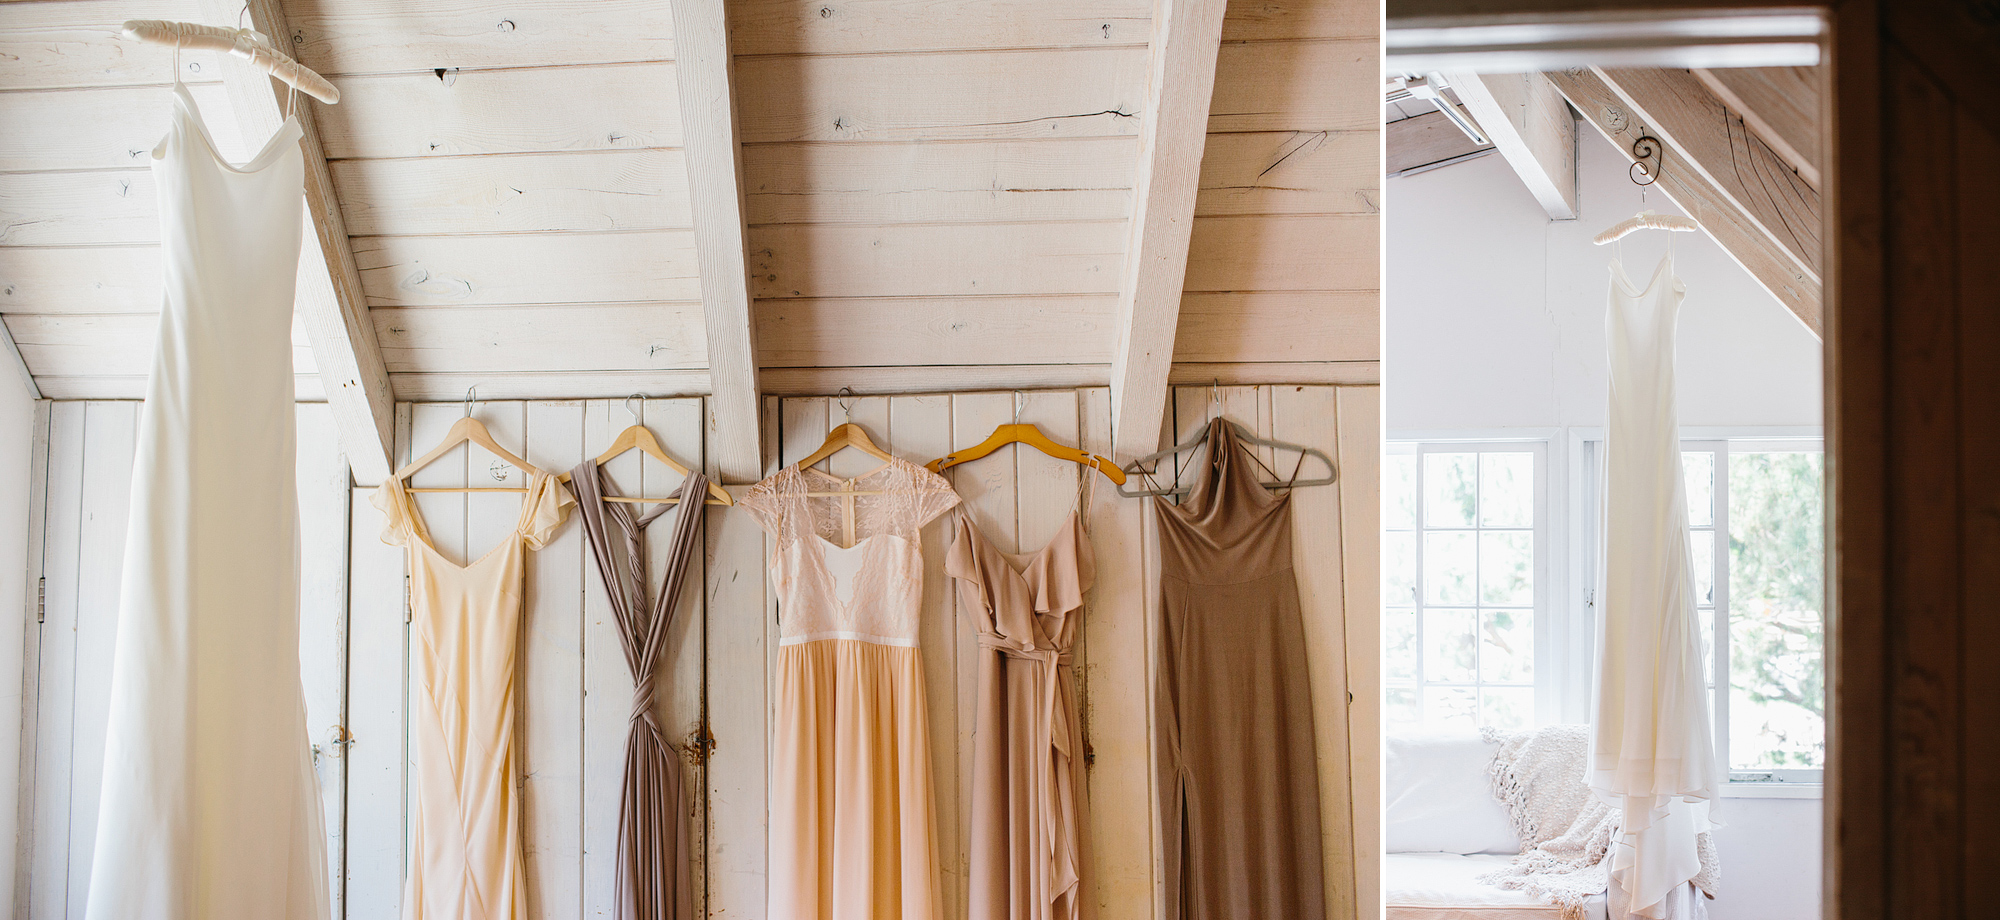 The bride's dress hanging near the bridesmaids' dresses. 